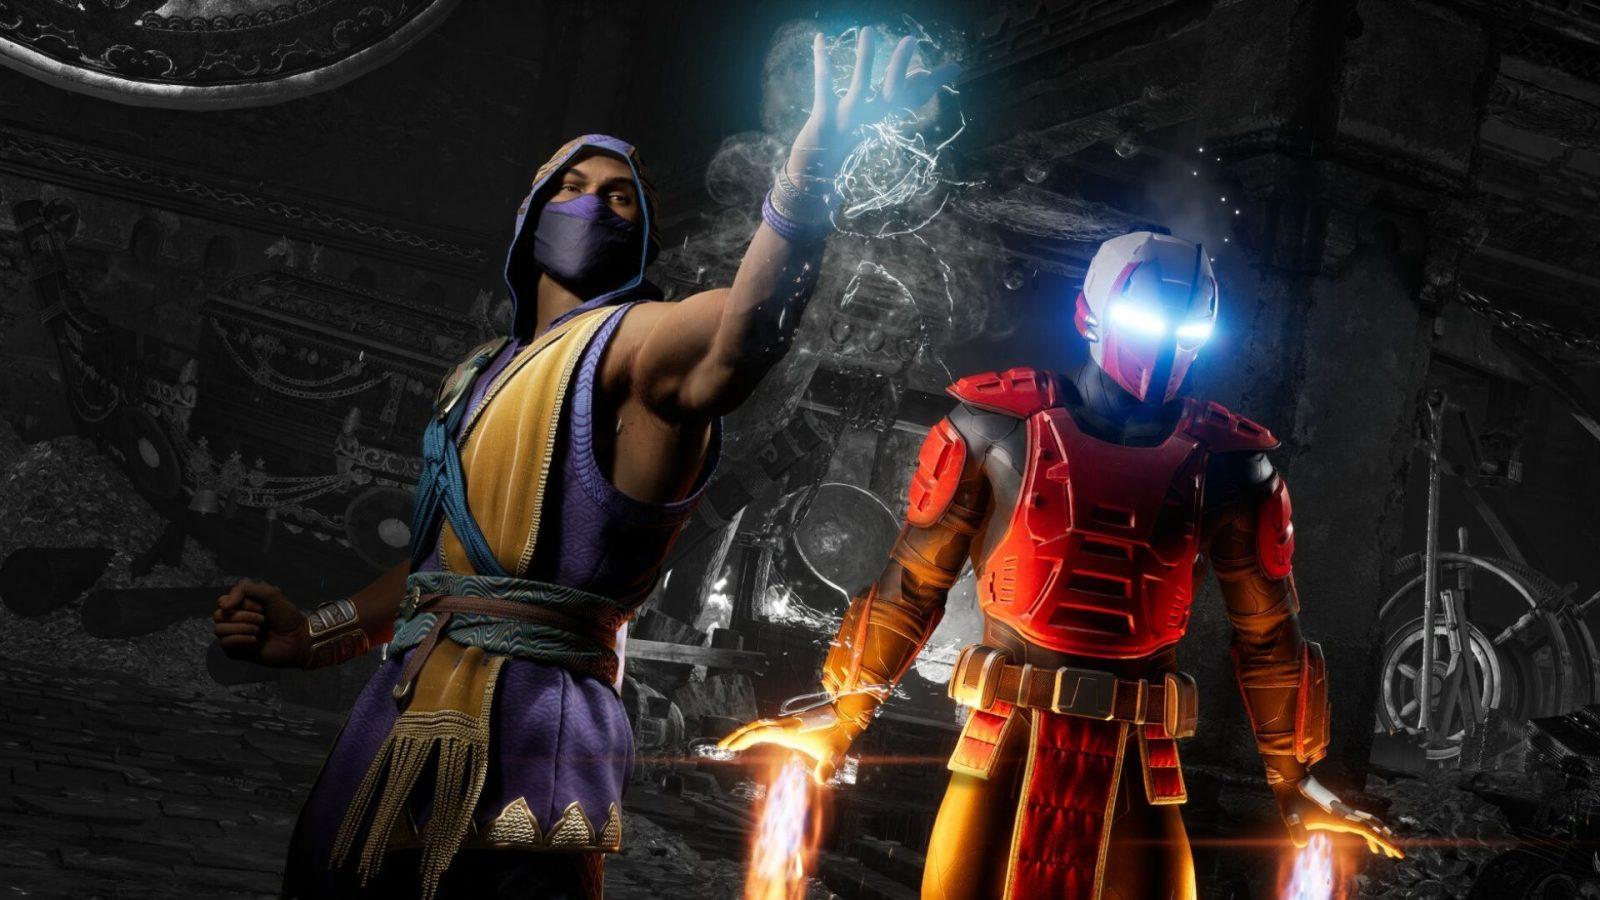 Mortal Kombat 1 may have the best single-player mode in fighting games